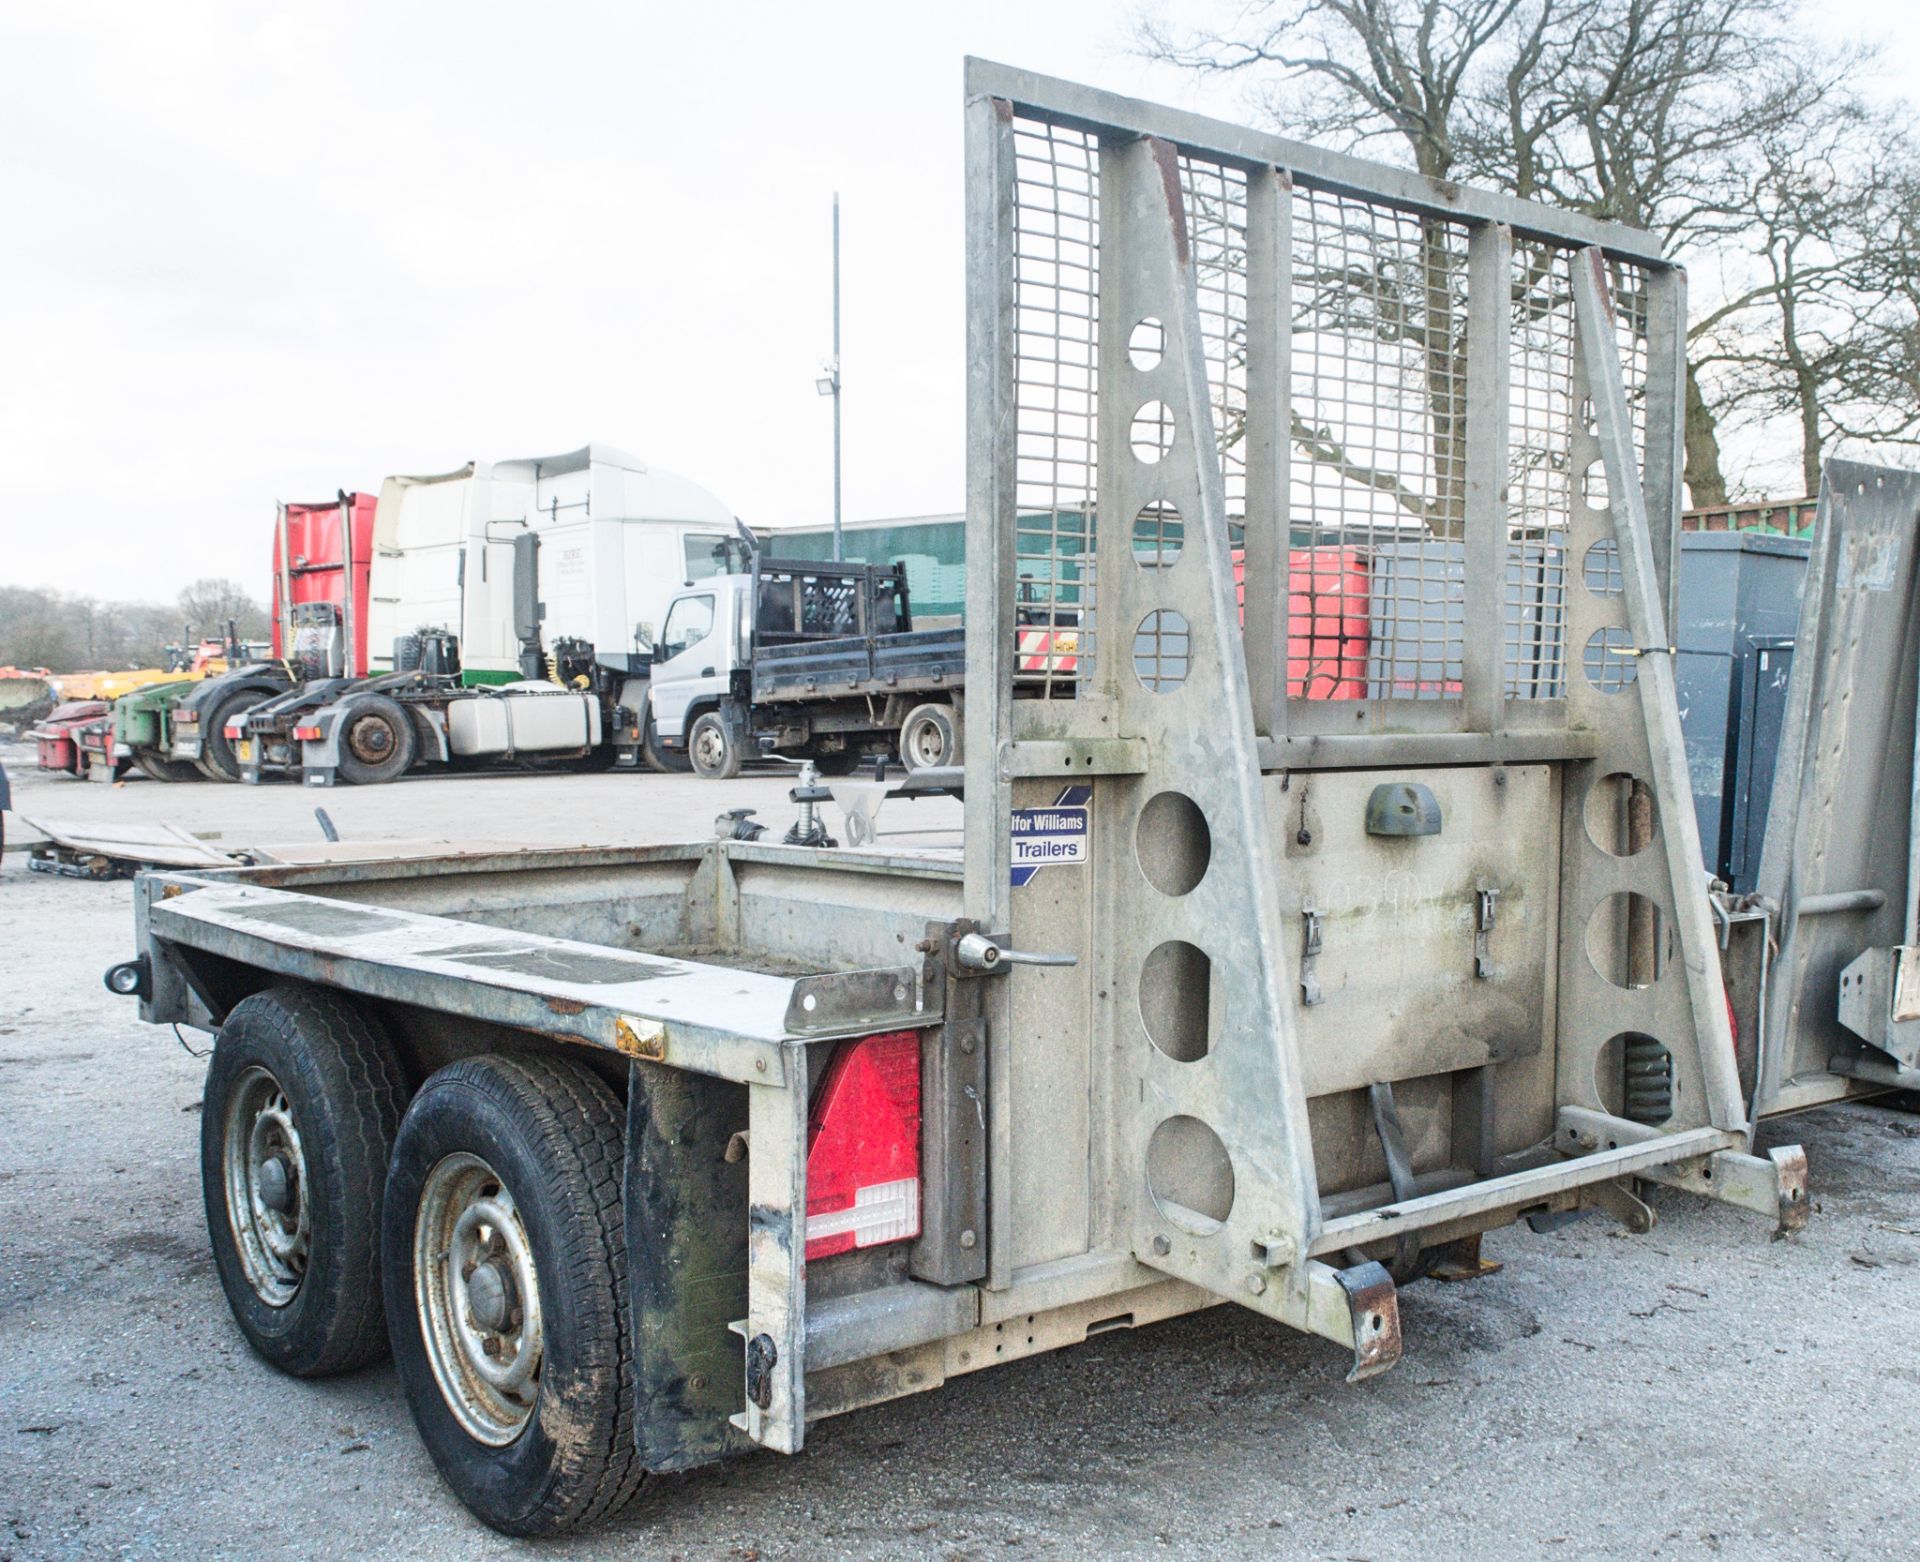 Ifor Williams GX84 8 ft x 4 ft tandem axle plant trailer 221301215 - Image 2 of 2